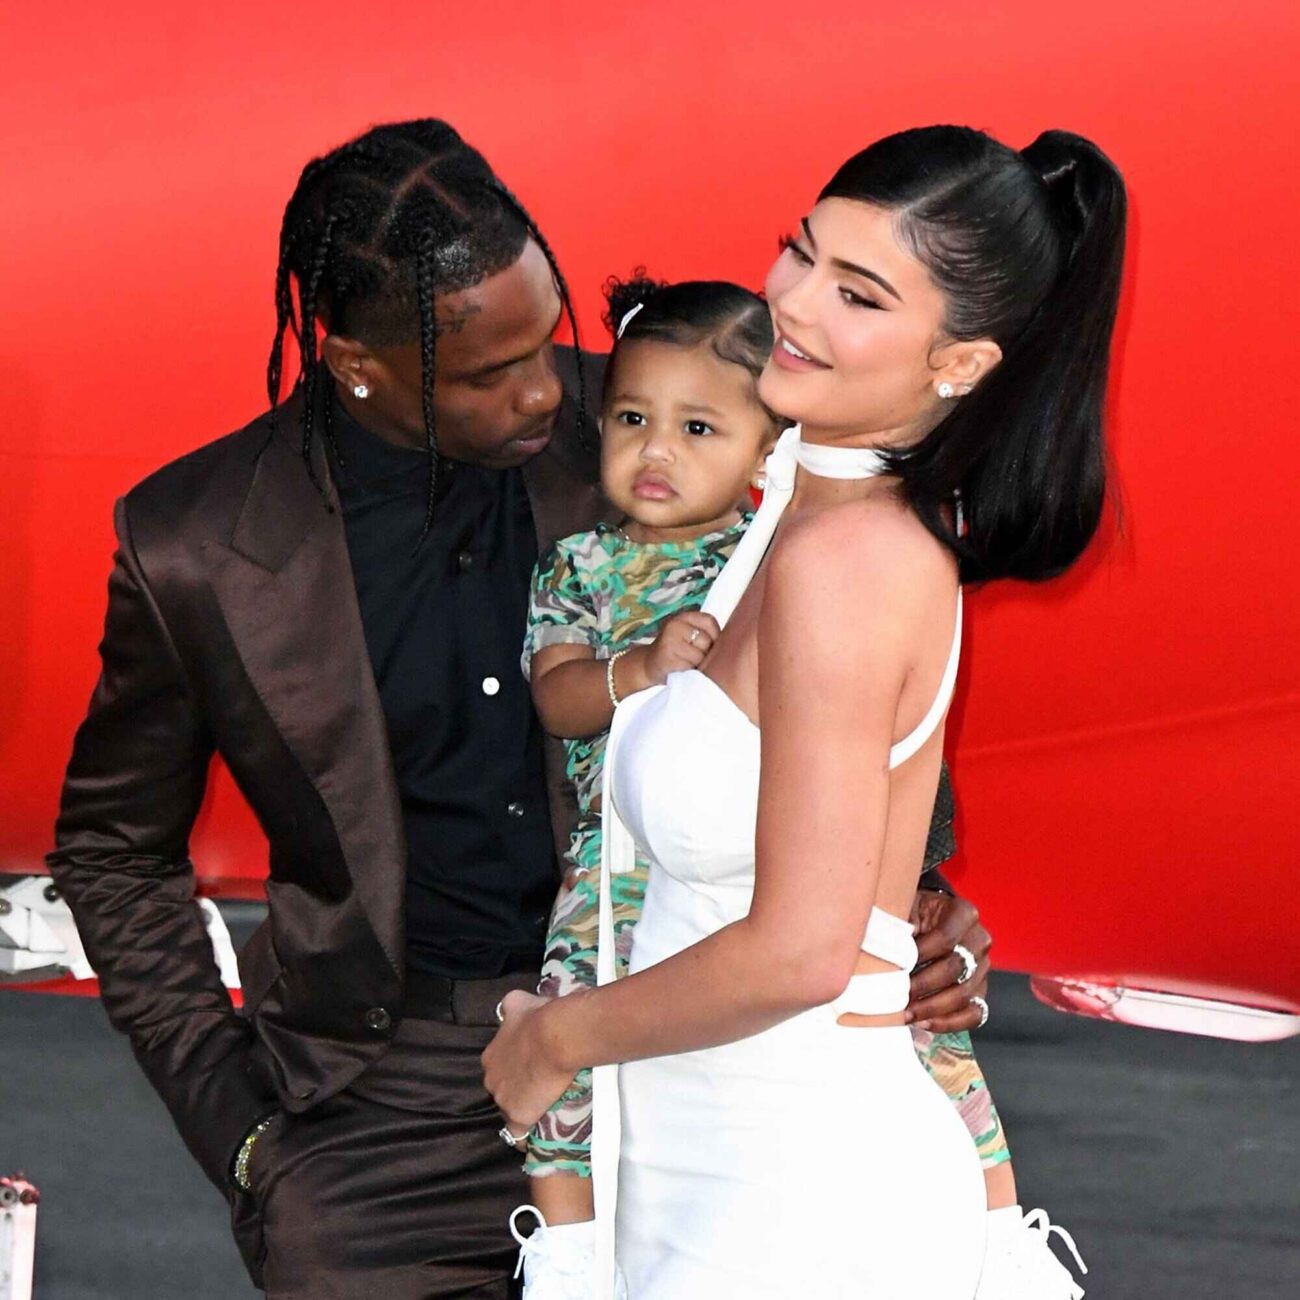 It finally happened: Kylie Jenner is pregnant again! Pick a proper baby shower gift and learn all about the superstar's official announcement!